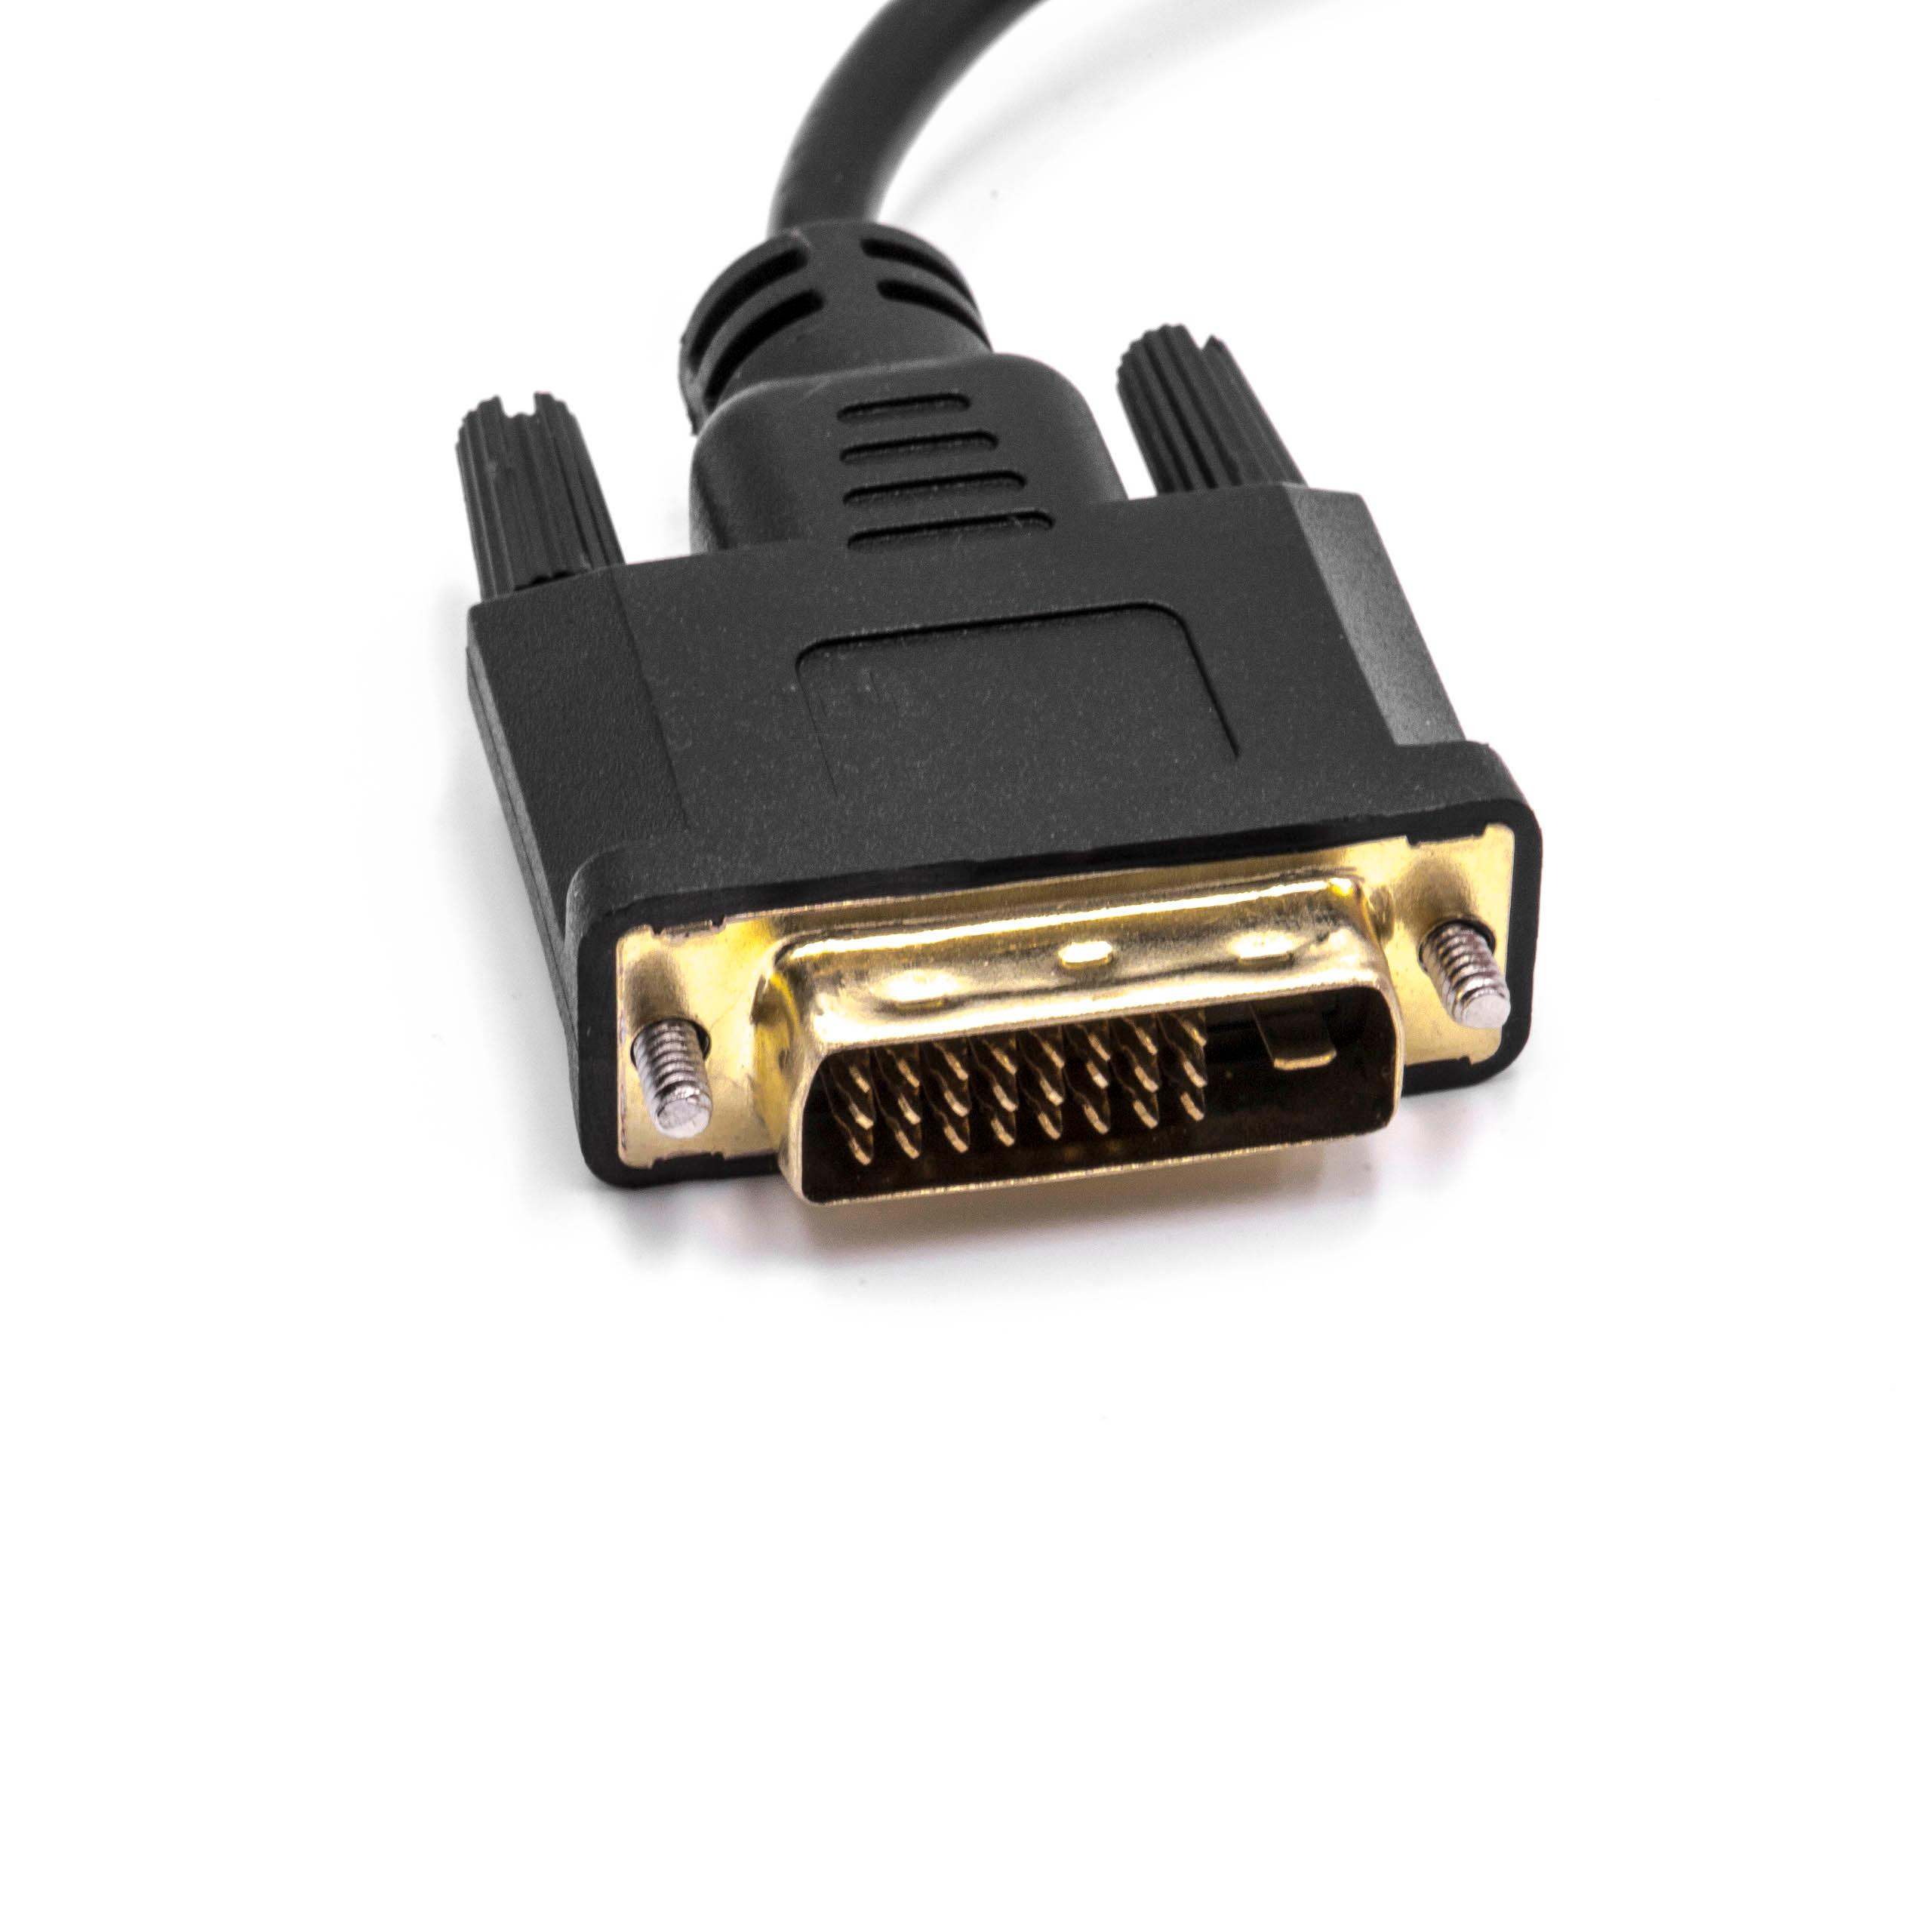 vhbw DVI Plug to VGA Socket Adapter for Connecting DVI Systems to VGA Appliances - Adapter Cable, 10 cm Black